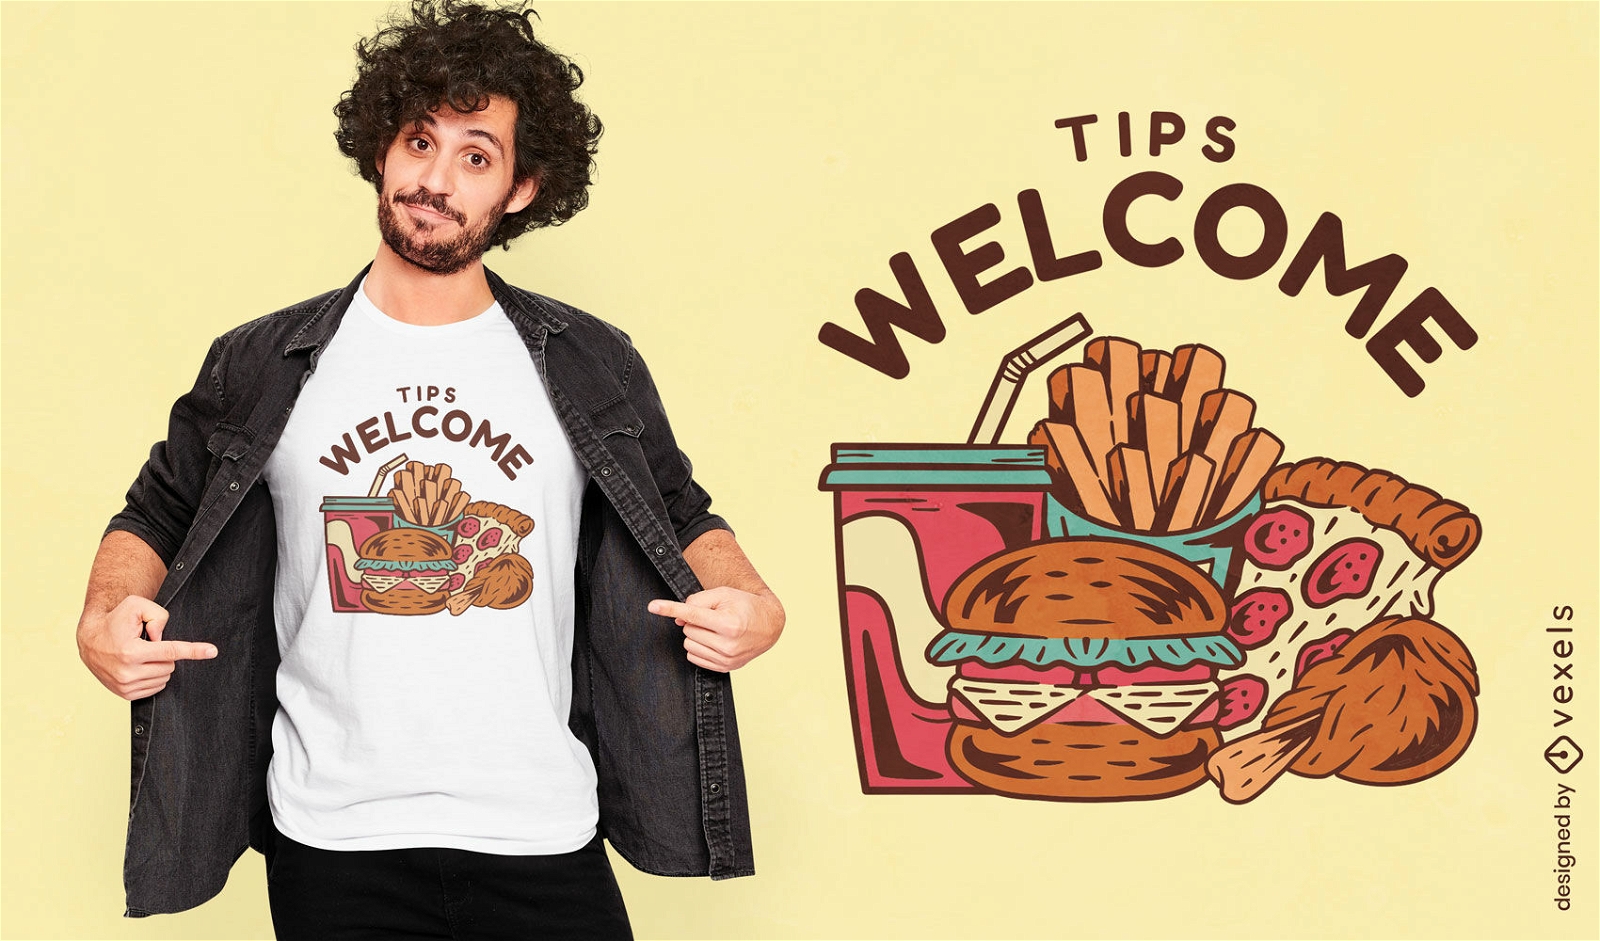 Tips welcome fast food t-shirt design